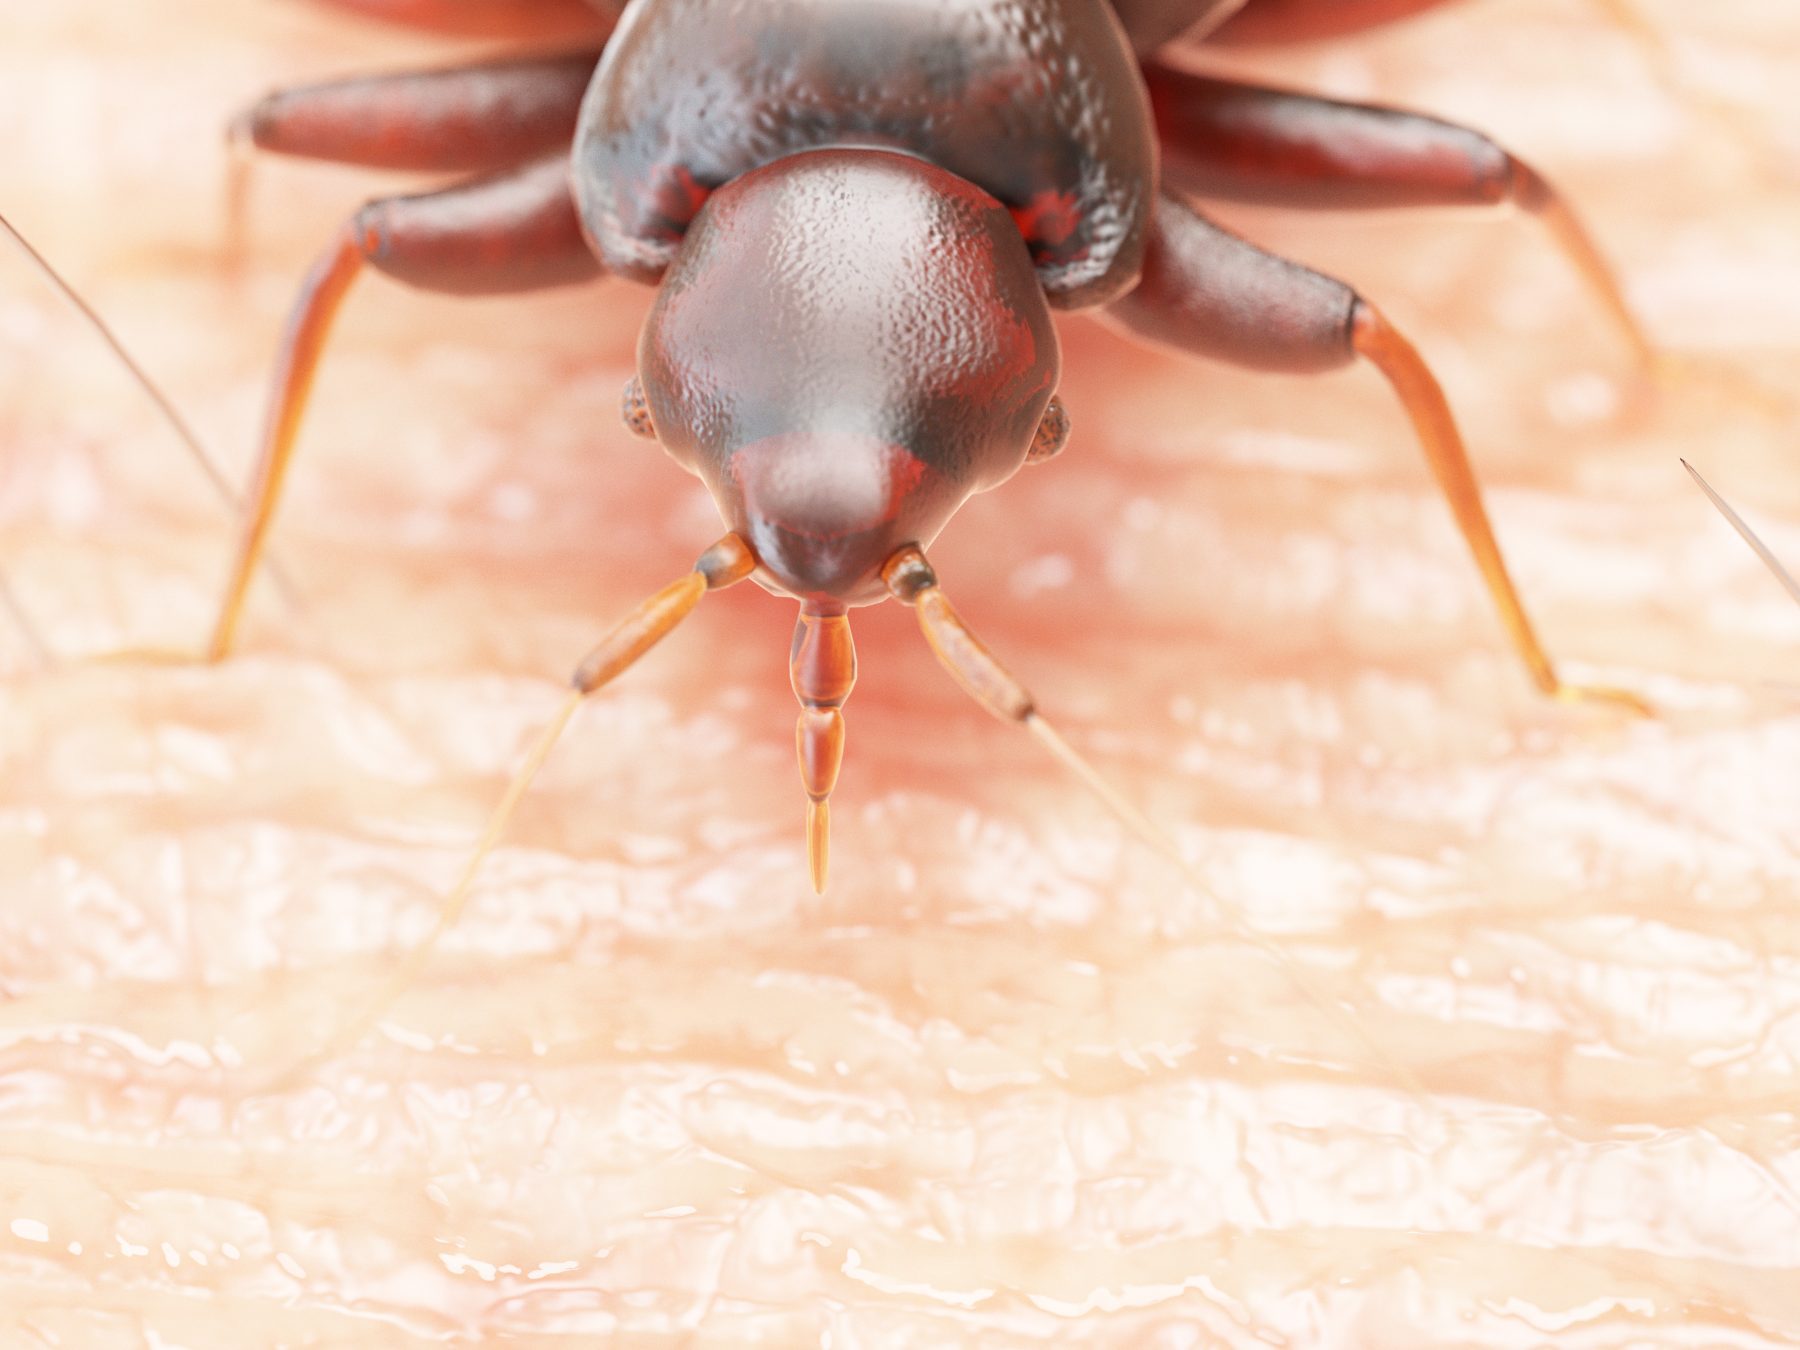 Very close up shot of bed bug on someone's skin